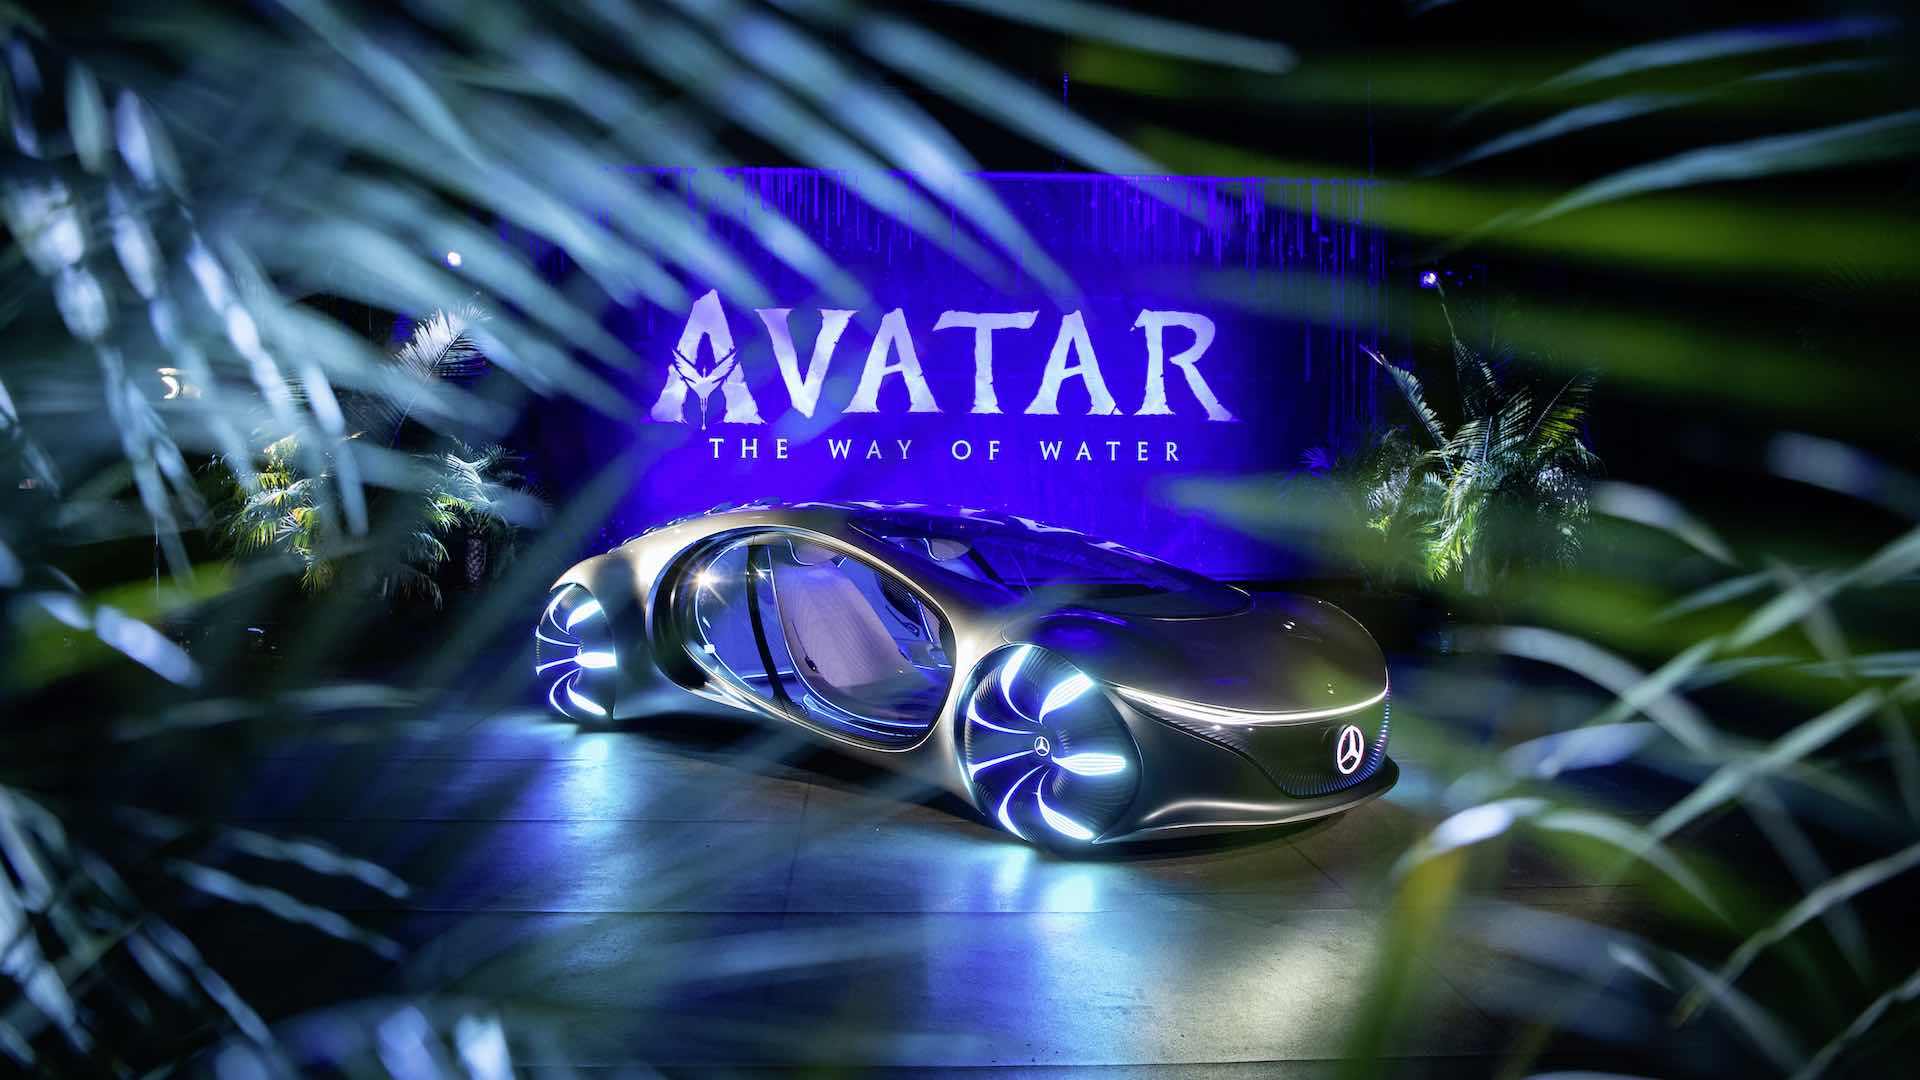 20th Century Studios and Mercedes-Benz collaborate on Avatar - The Way of Water